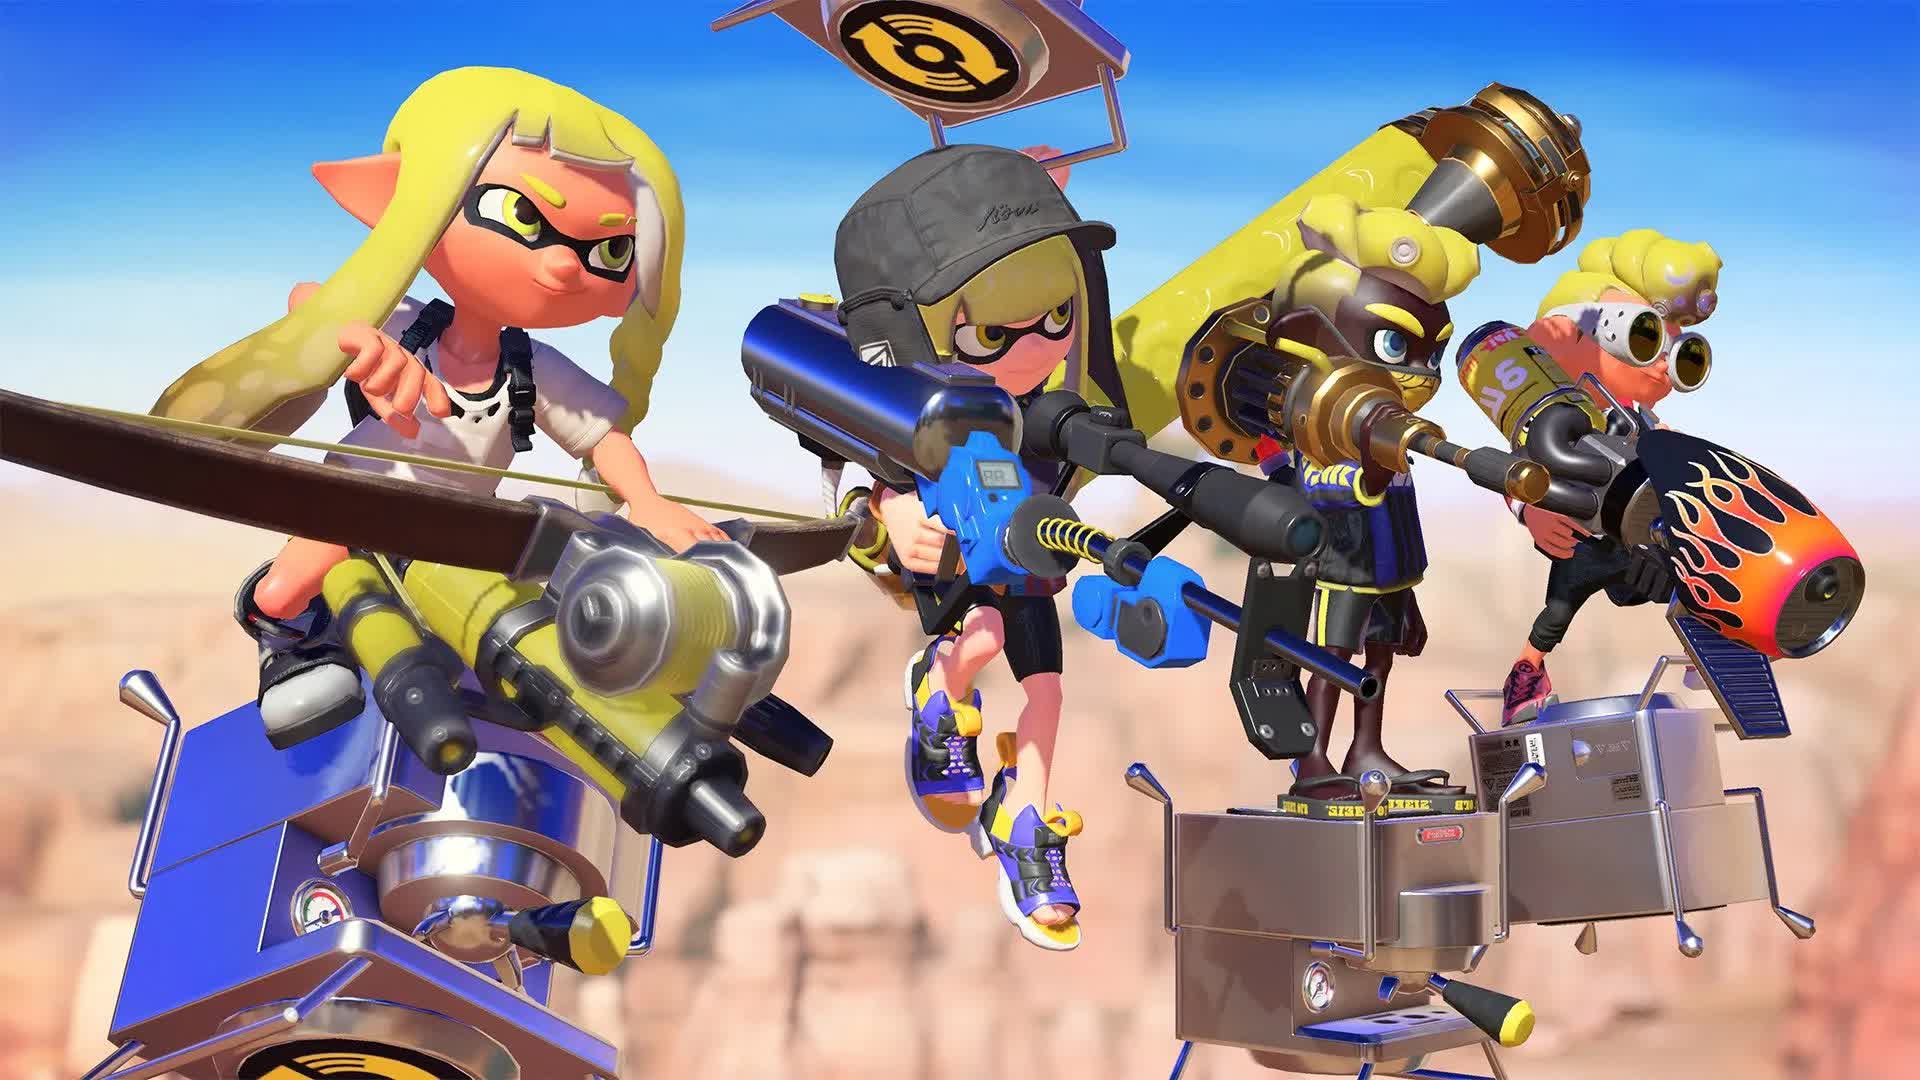 Splatoon 3 has smashed video game launch records in Japan